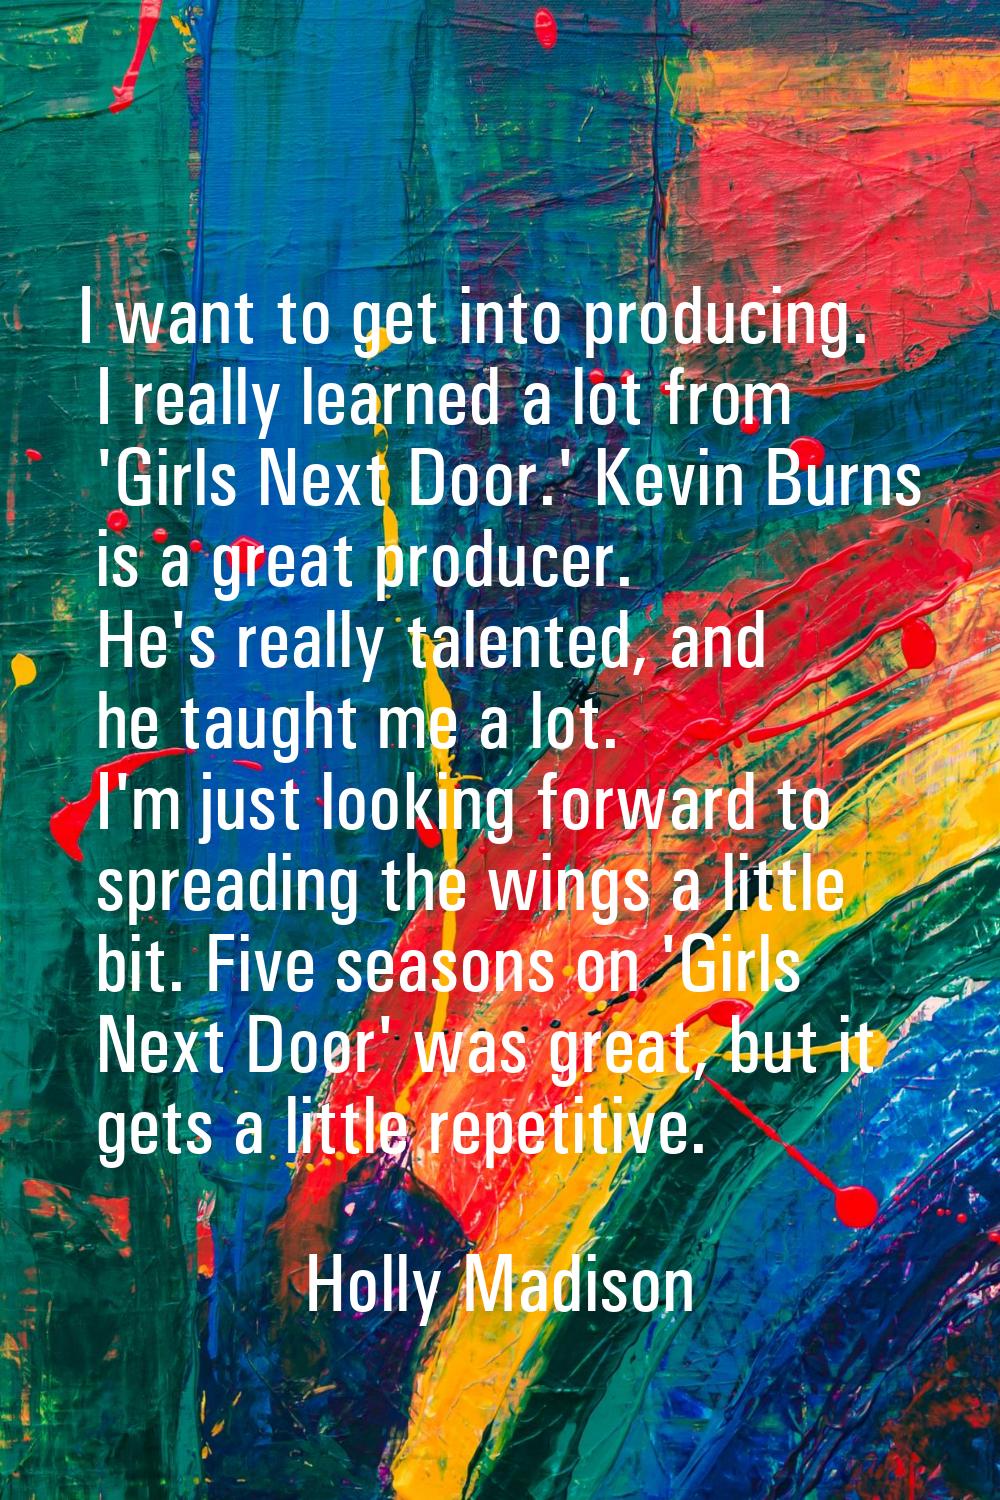 I want to get into producing. I really learned a lot from 'Girls Next Door.' Kevin Burns is a great